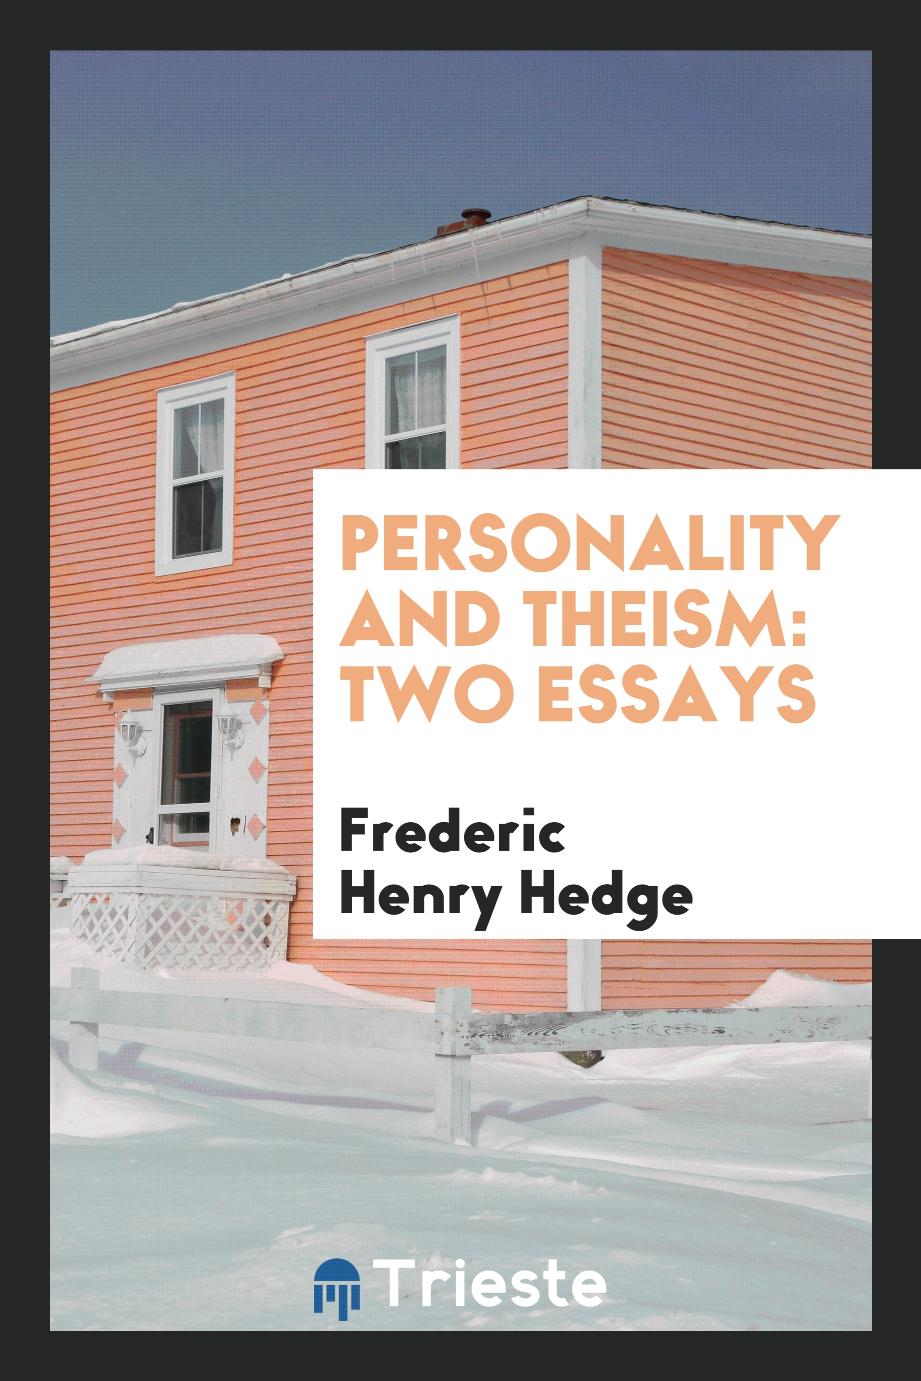 Personality and Theism: Two Essays